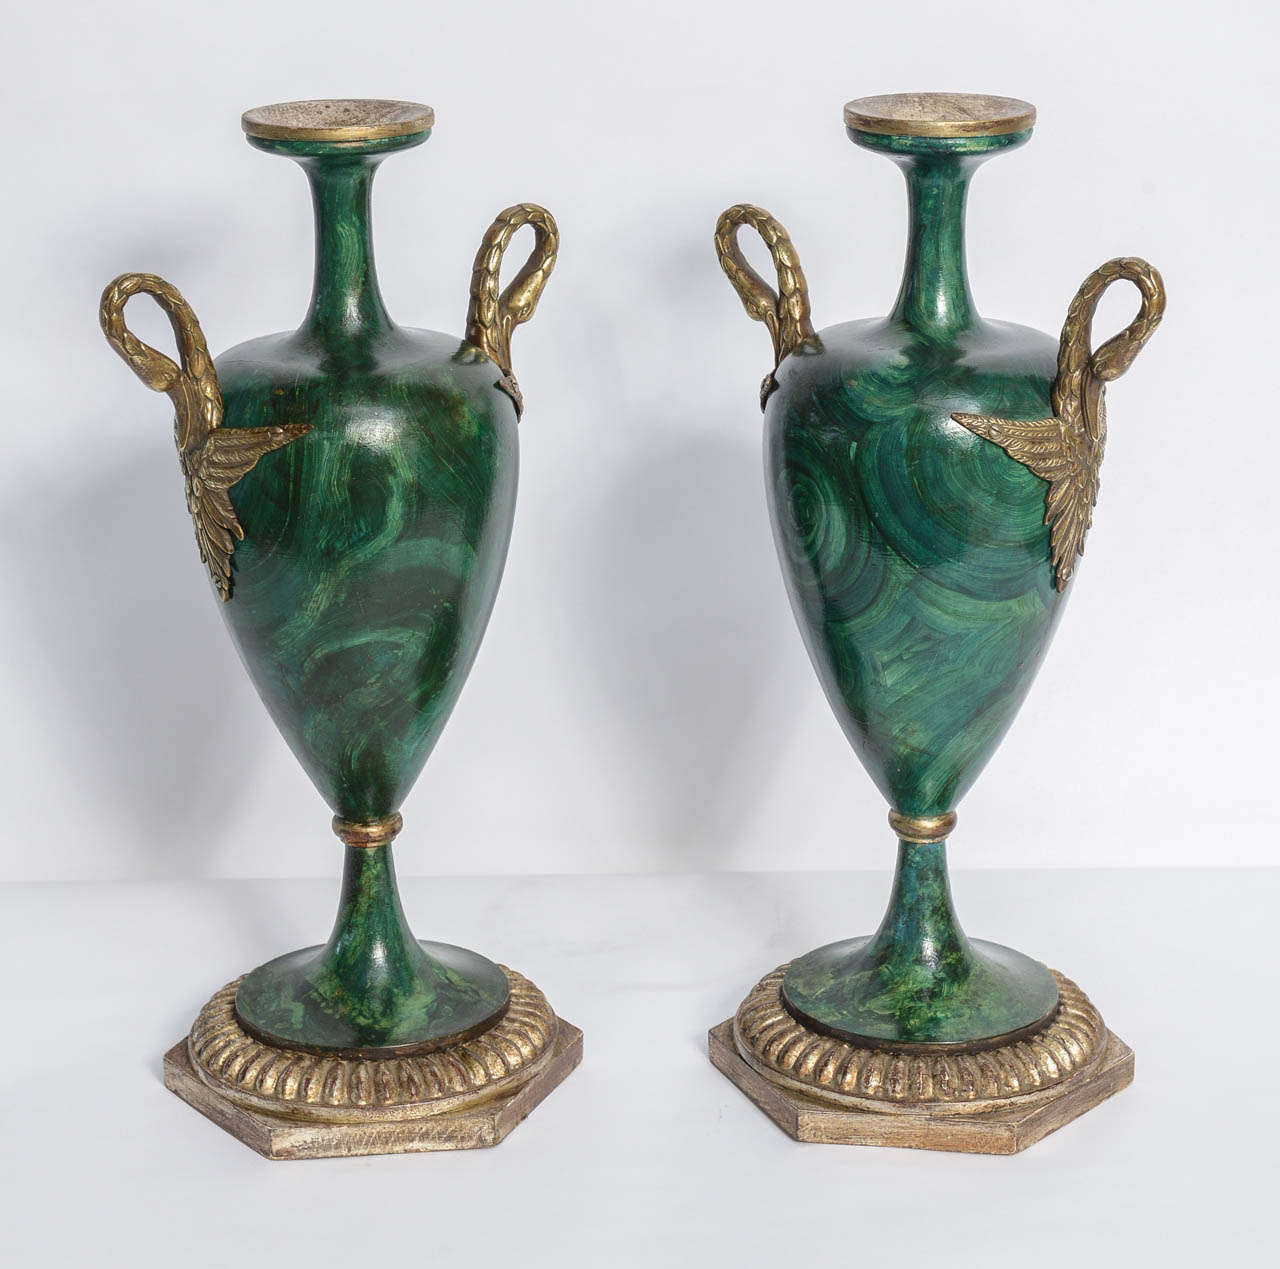 Antique Pair Neoclassical Faux Malachite & Silver Gilt Wood Urns with Bronze Swan handles.